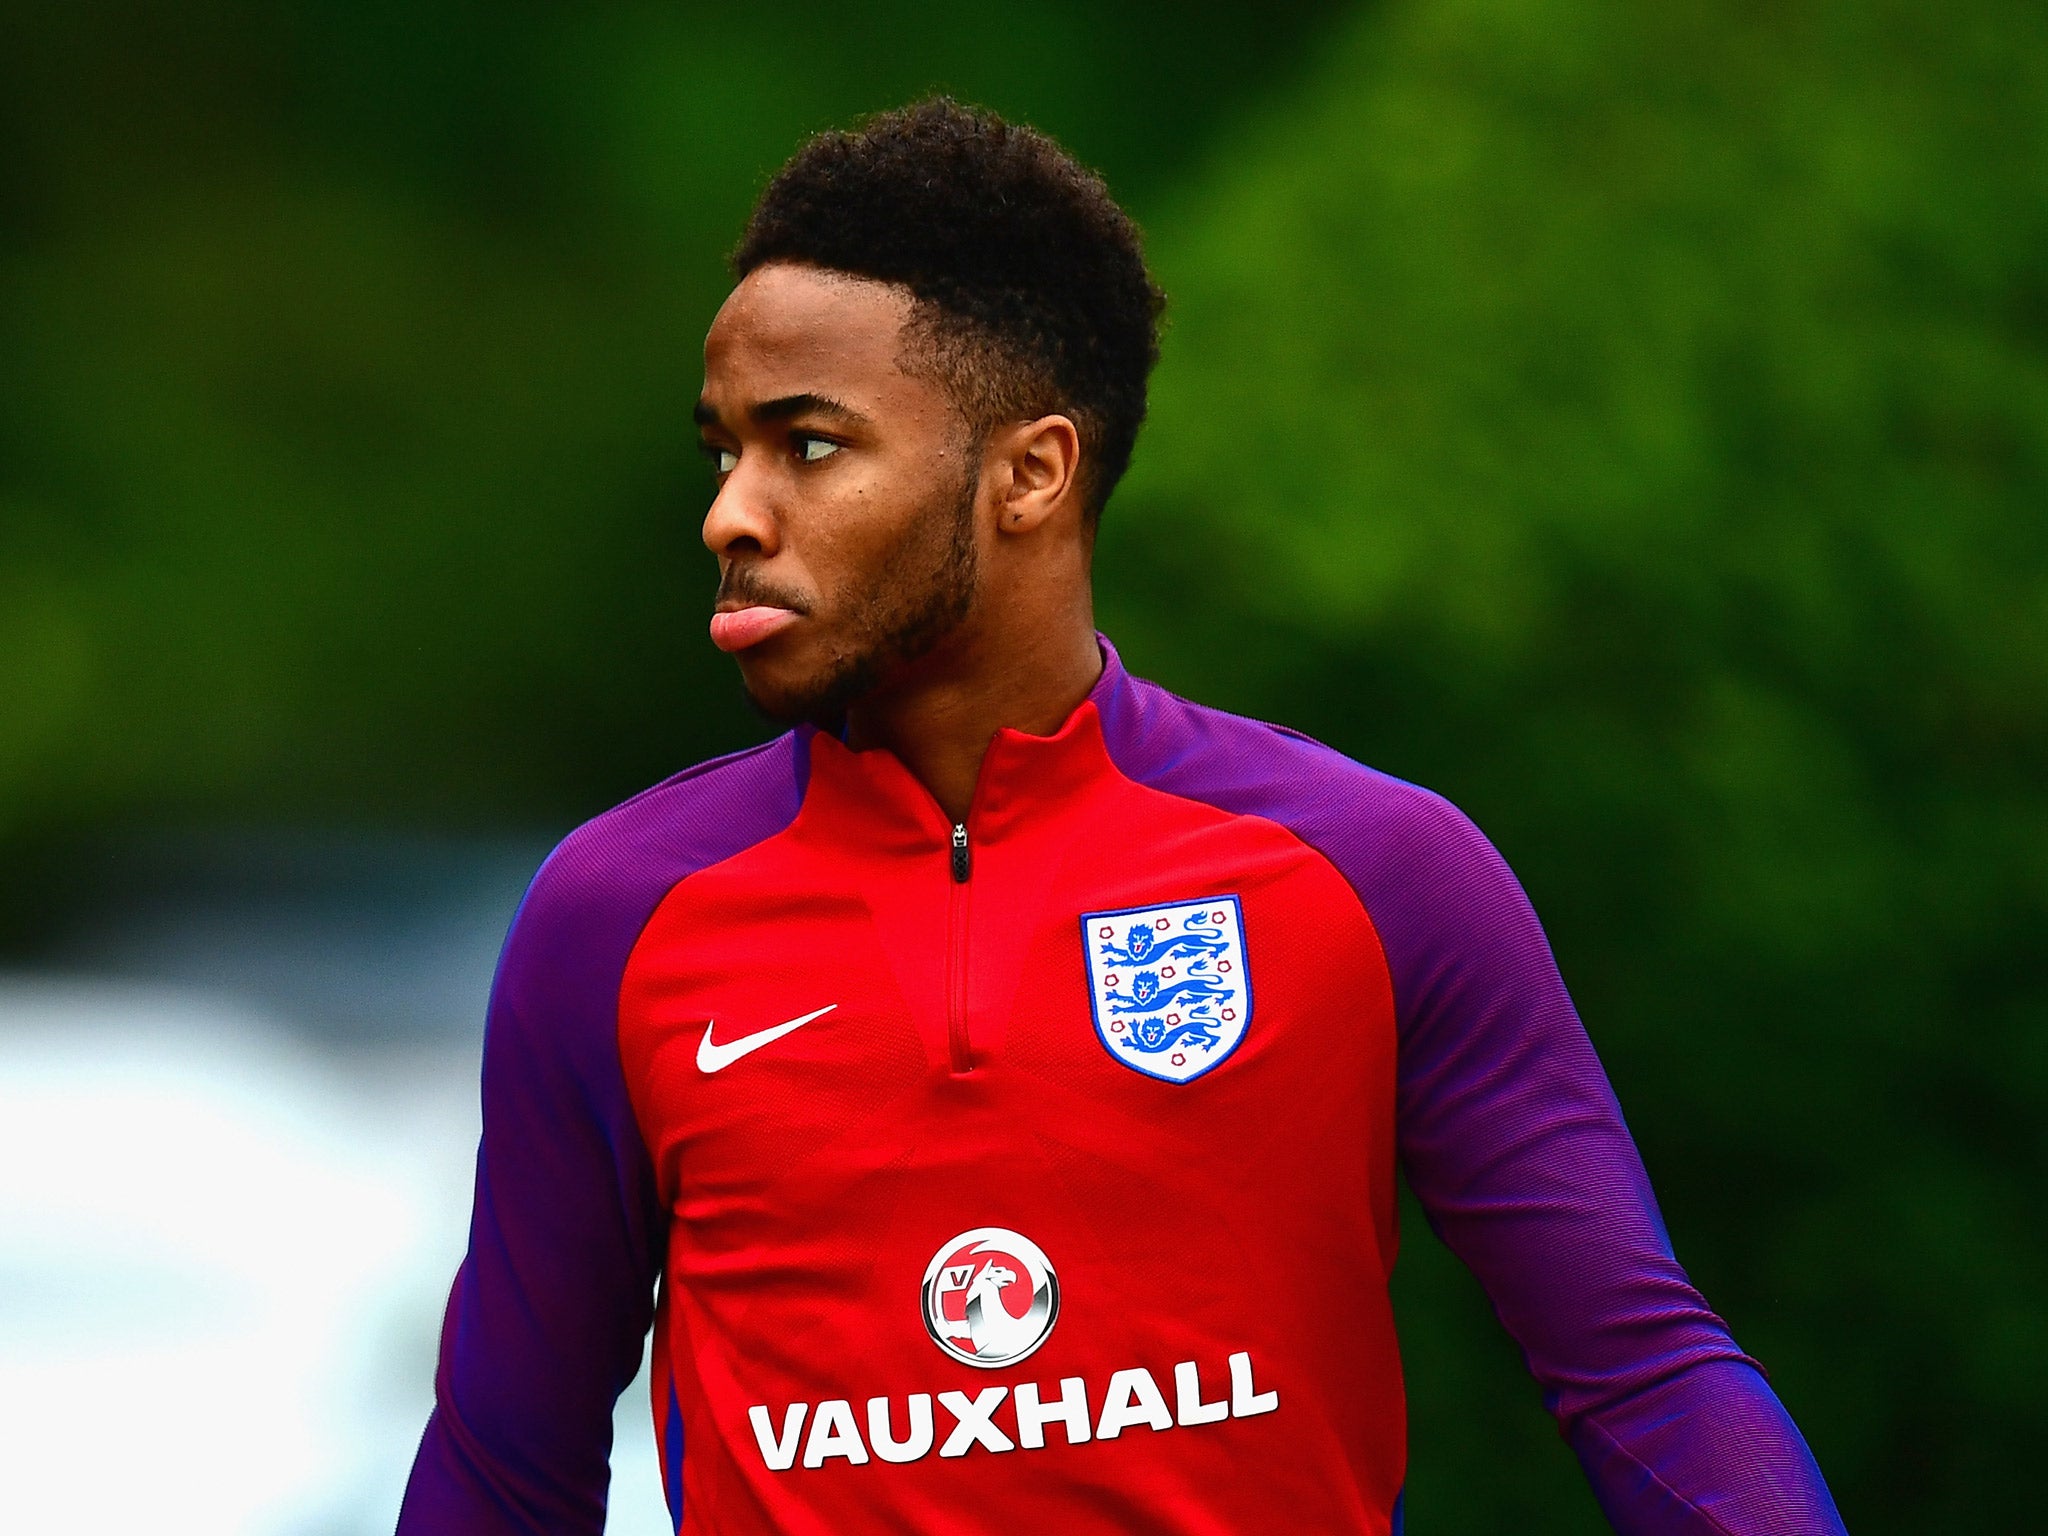 Raheem Sterling is set to start England's Euro 2016 opener against Russia